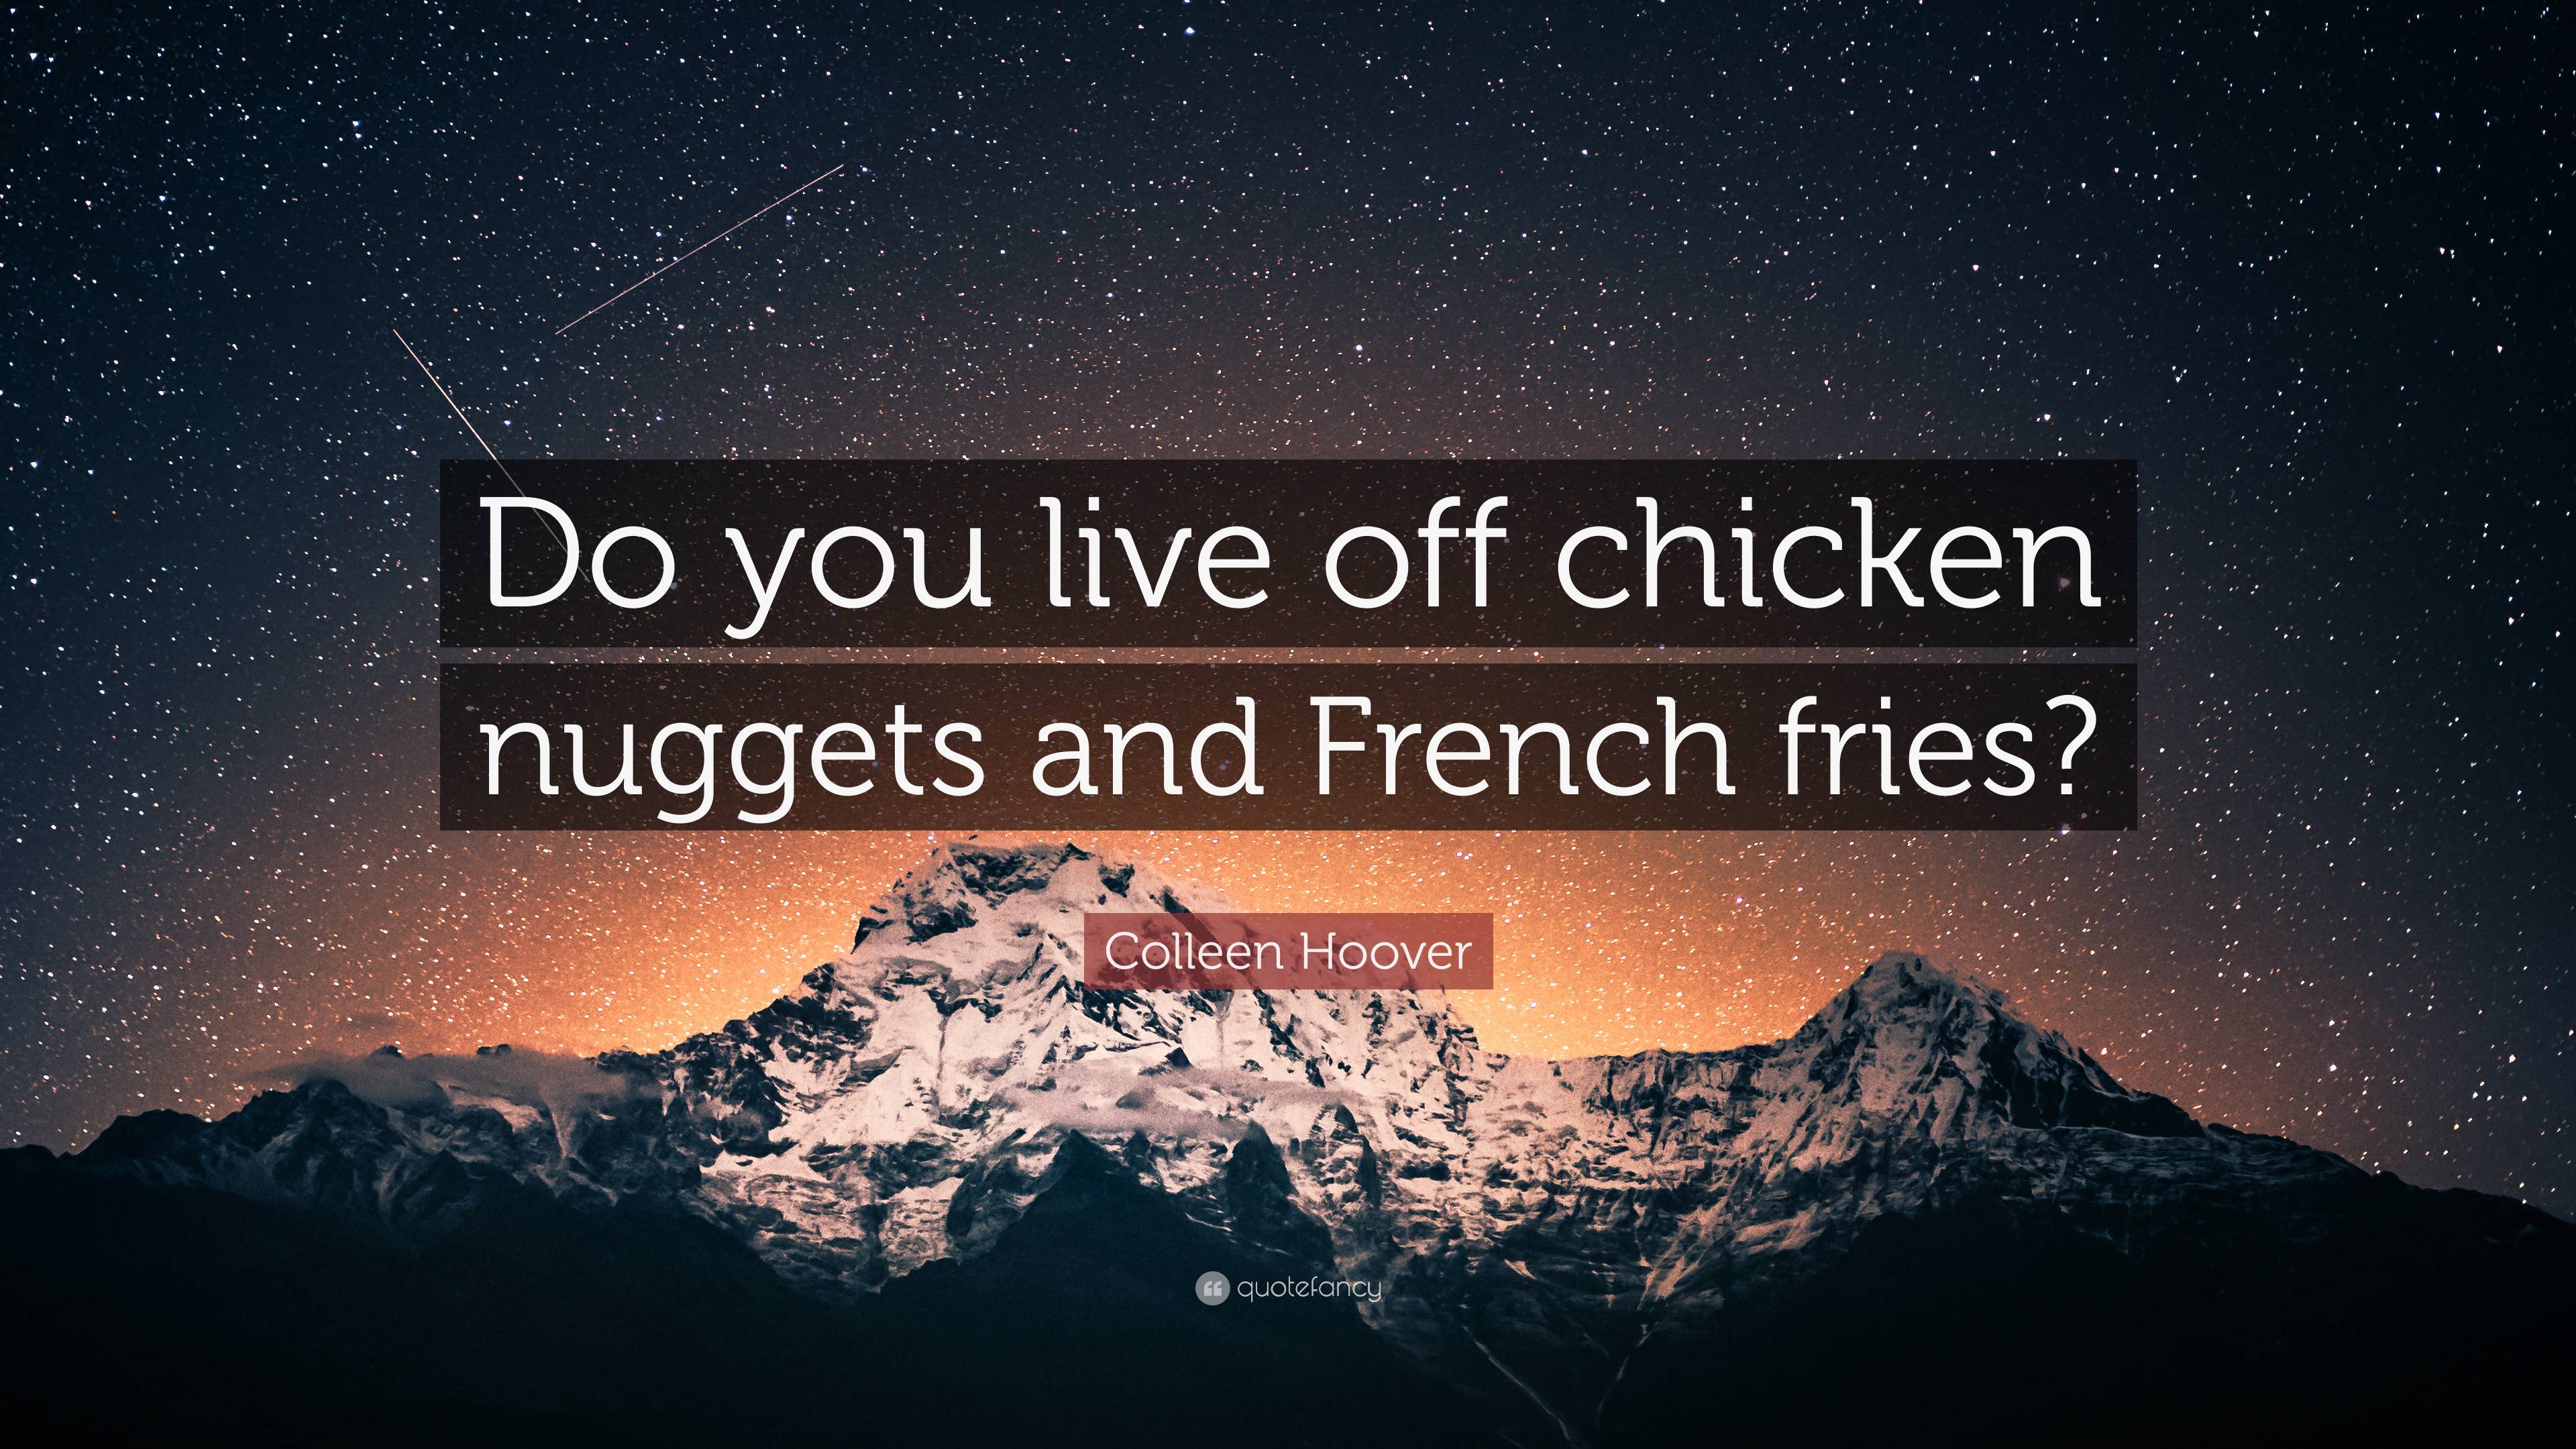 https://quotefancy.com/media/wallpaper/3840x2160/7413433-Colleen-Hoover-Quote-Do-you-live-off-chicken-nuggets-and-French.jpg